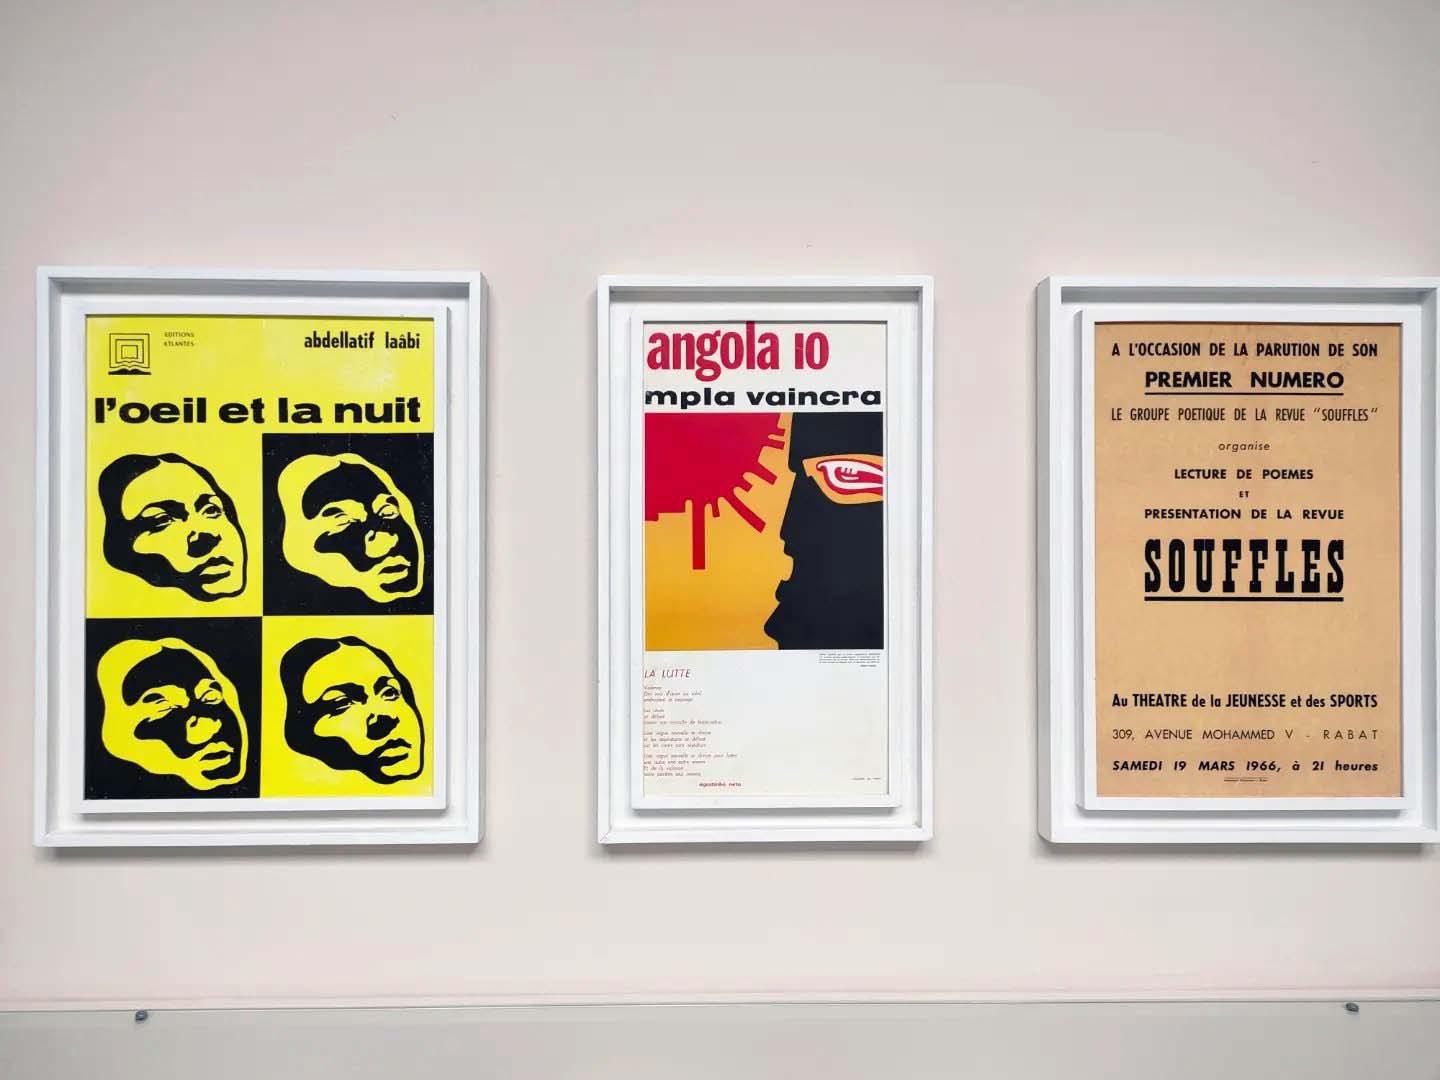 The first part of the exhibition opens with a tribute to the magazine "Souffles"